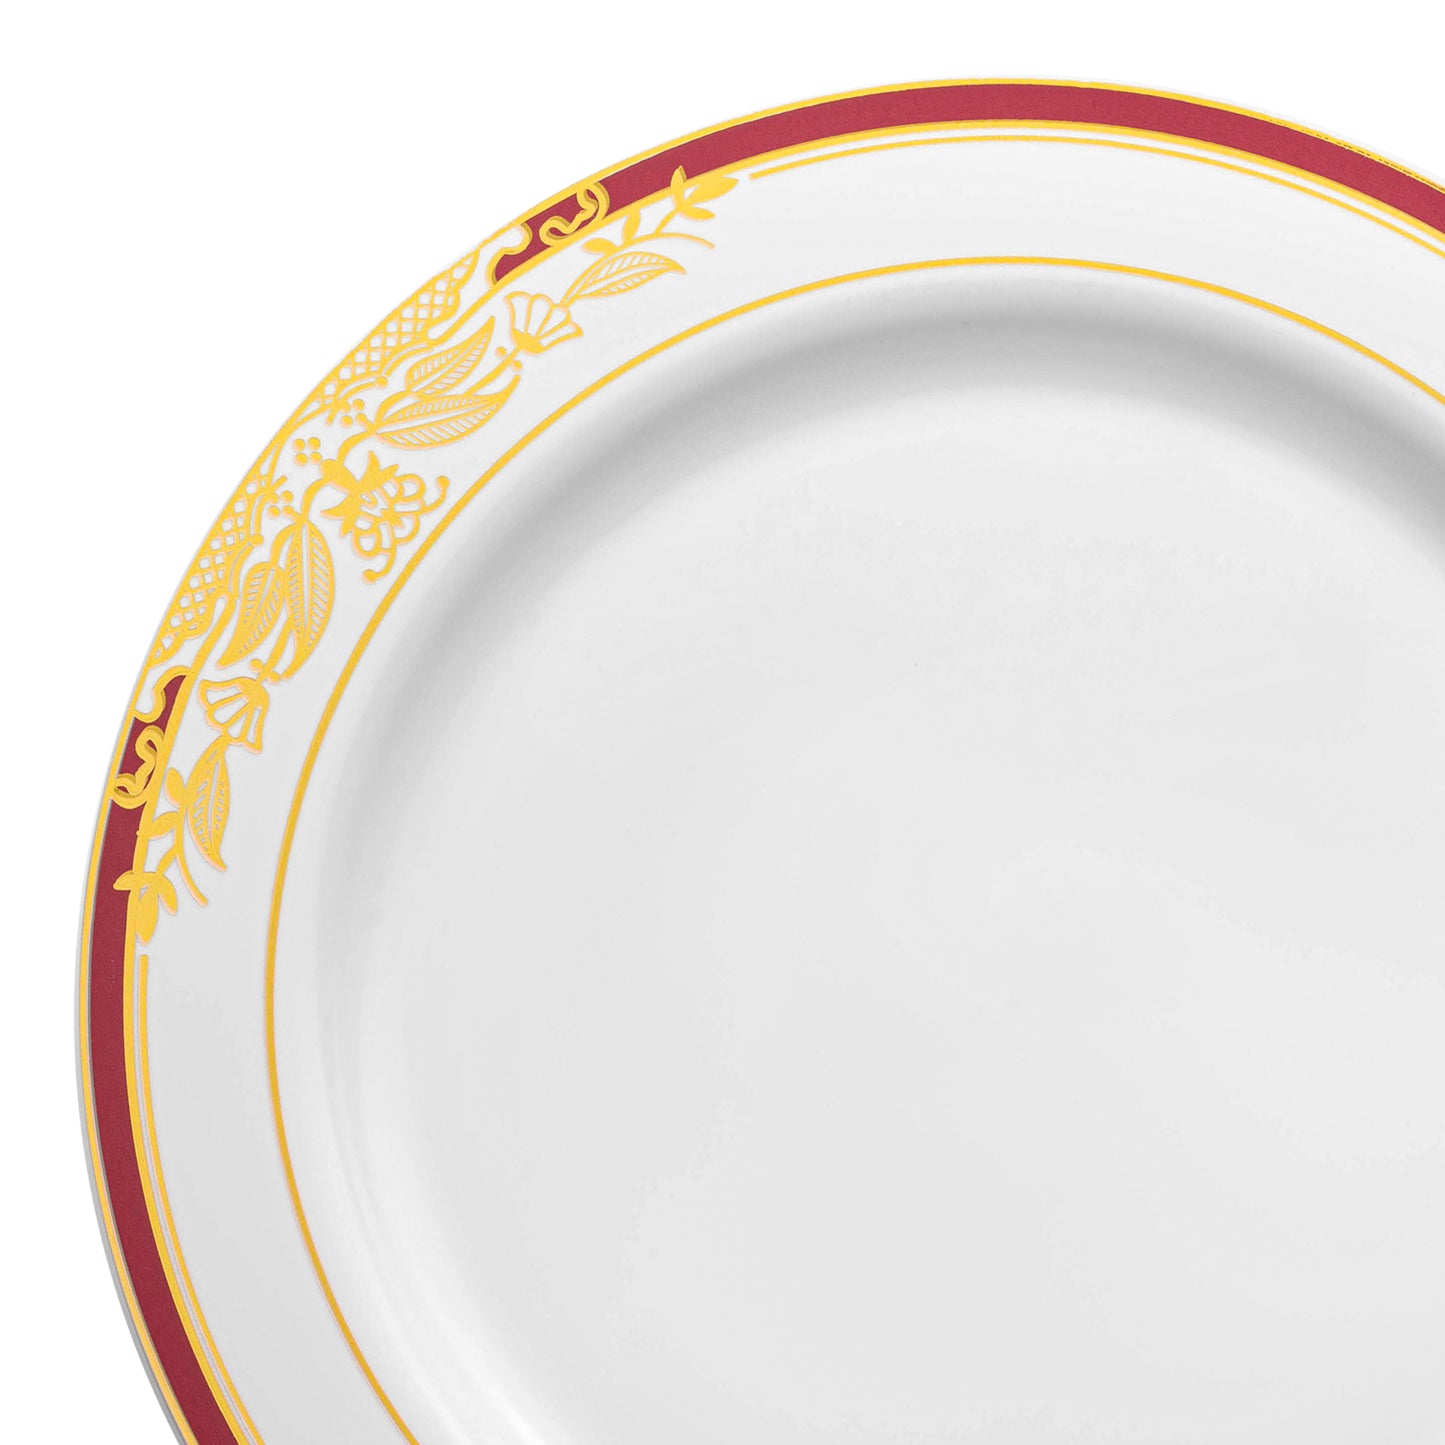 White with Burgundy and Gold Harmony Rim Plastic Salad Plates (7.5")